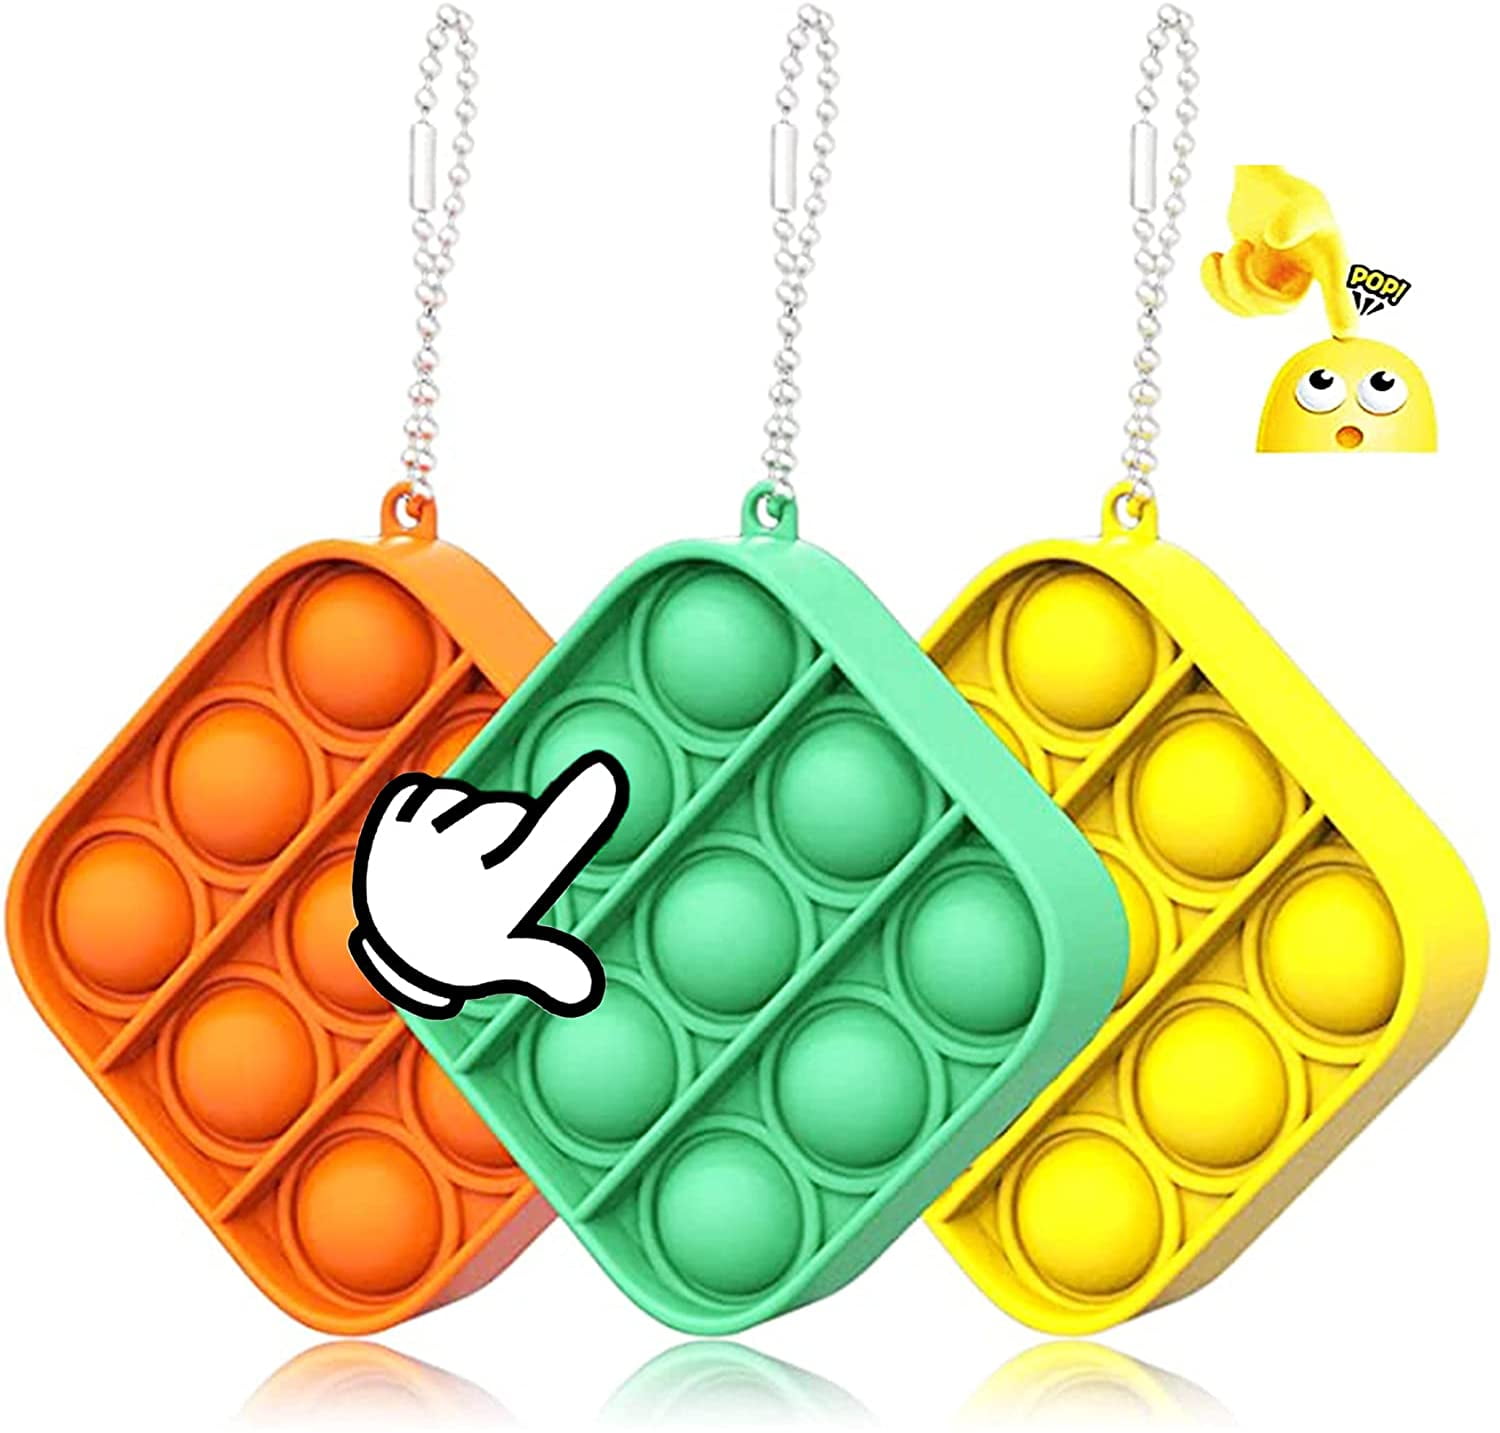 5 PCS Mini Push pop Bubble Sensory Fidget Toy Hand Toys Keychain Toy Anxiety Stress Reliever for Kids Adults D